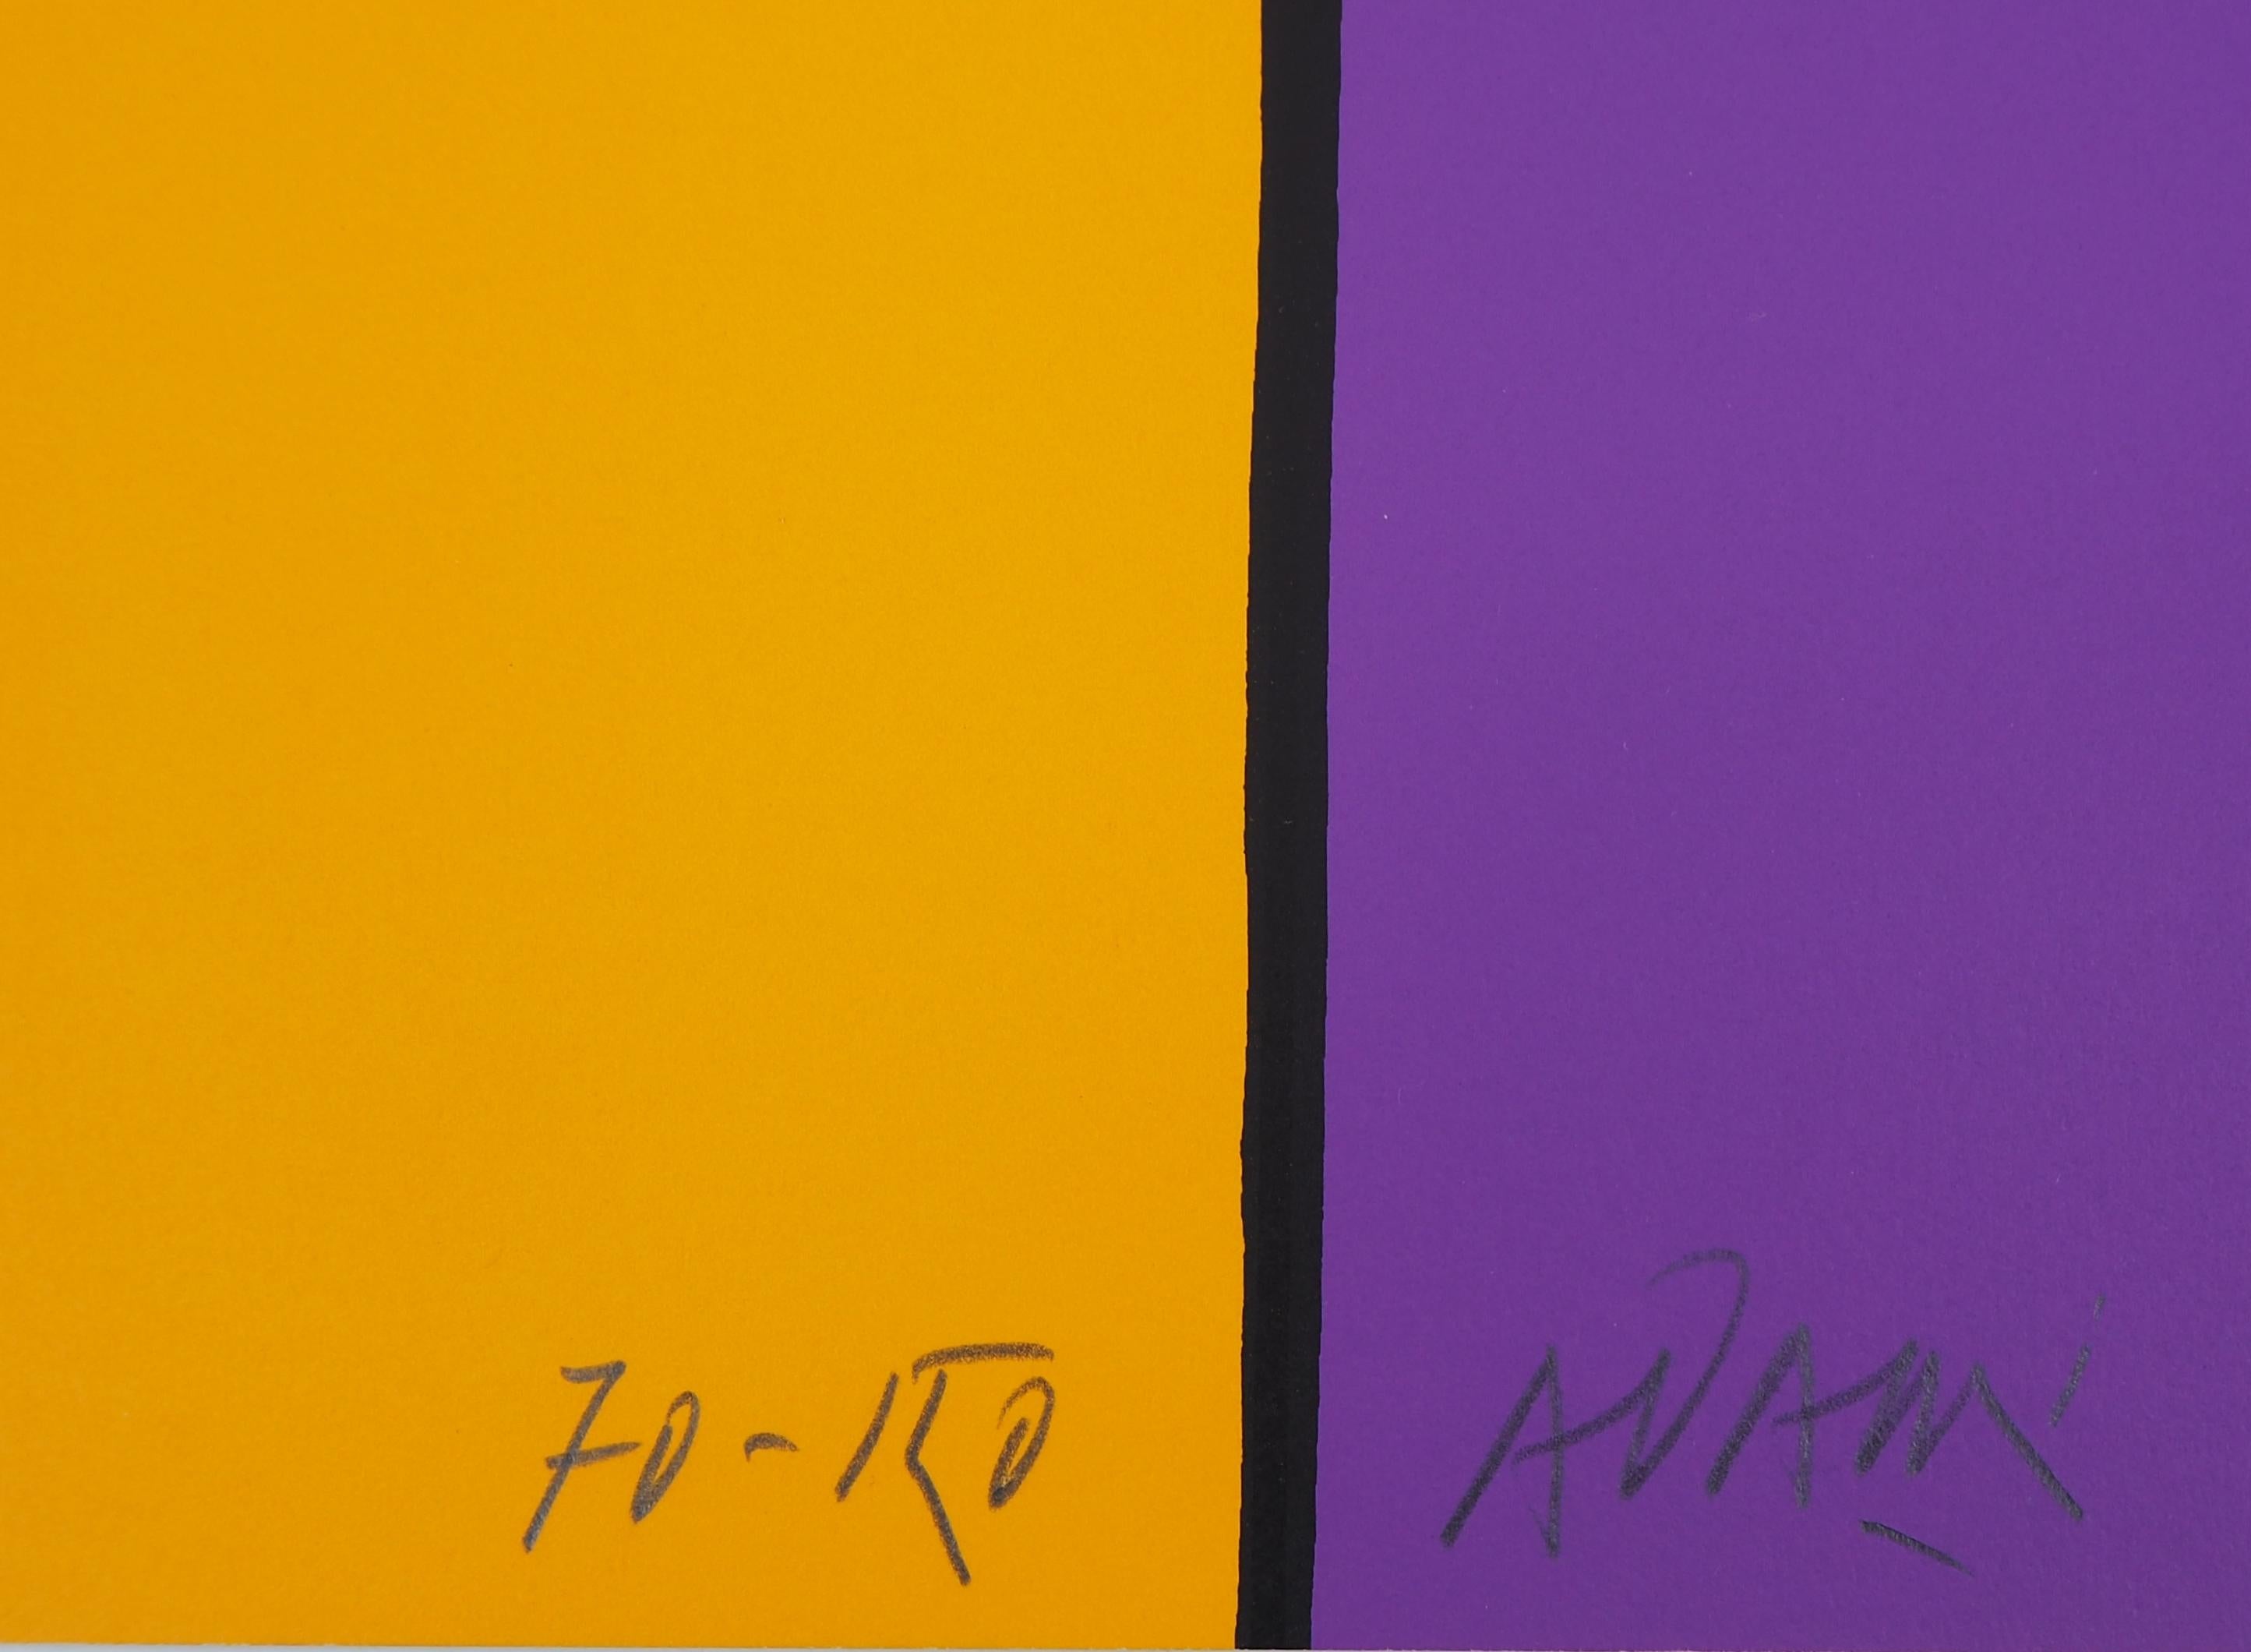 Careful : Wet Paint - Original lithograph, Handsigned - Limited /150 - Purple Figurative Print by Valerio Adami